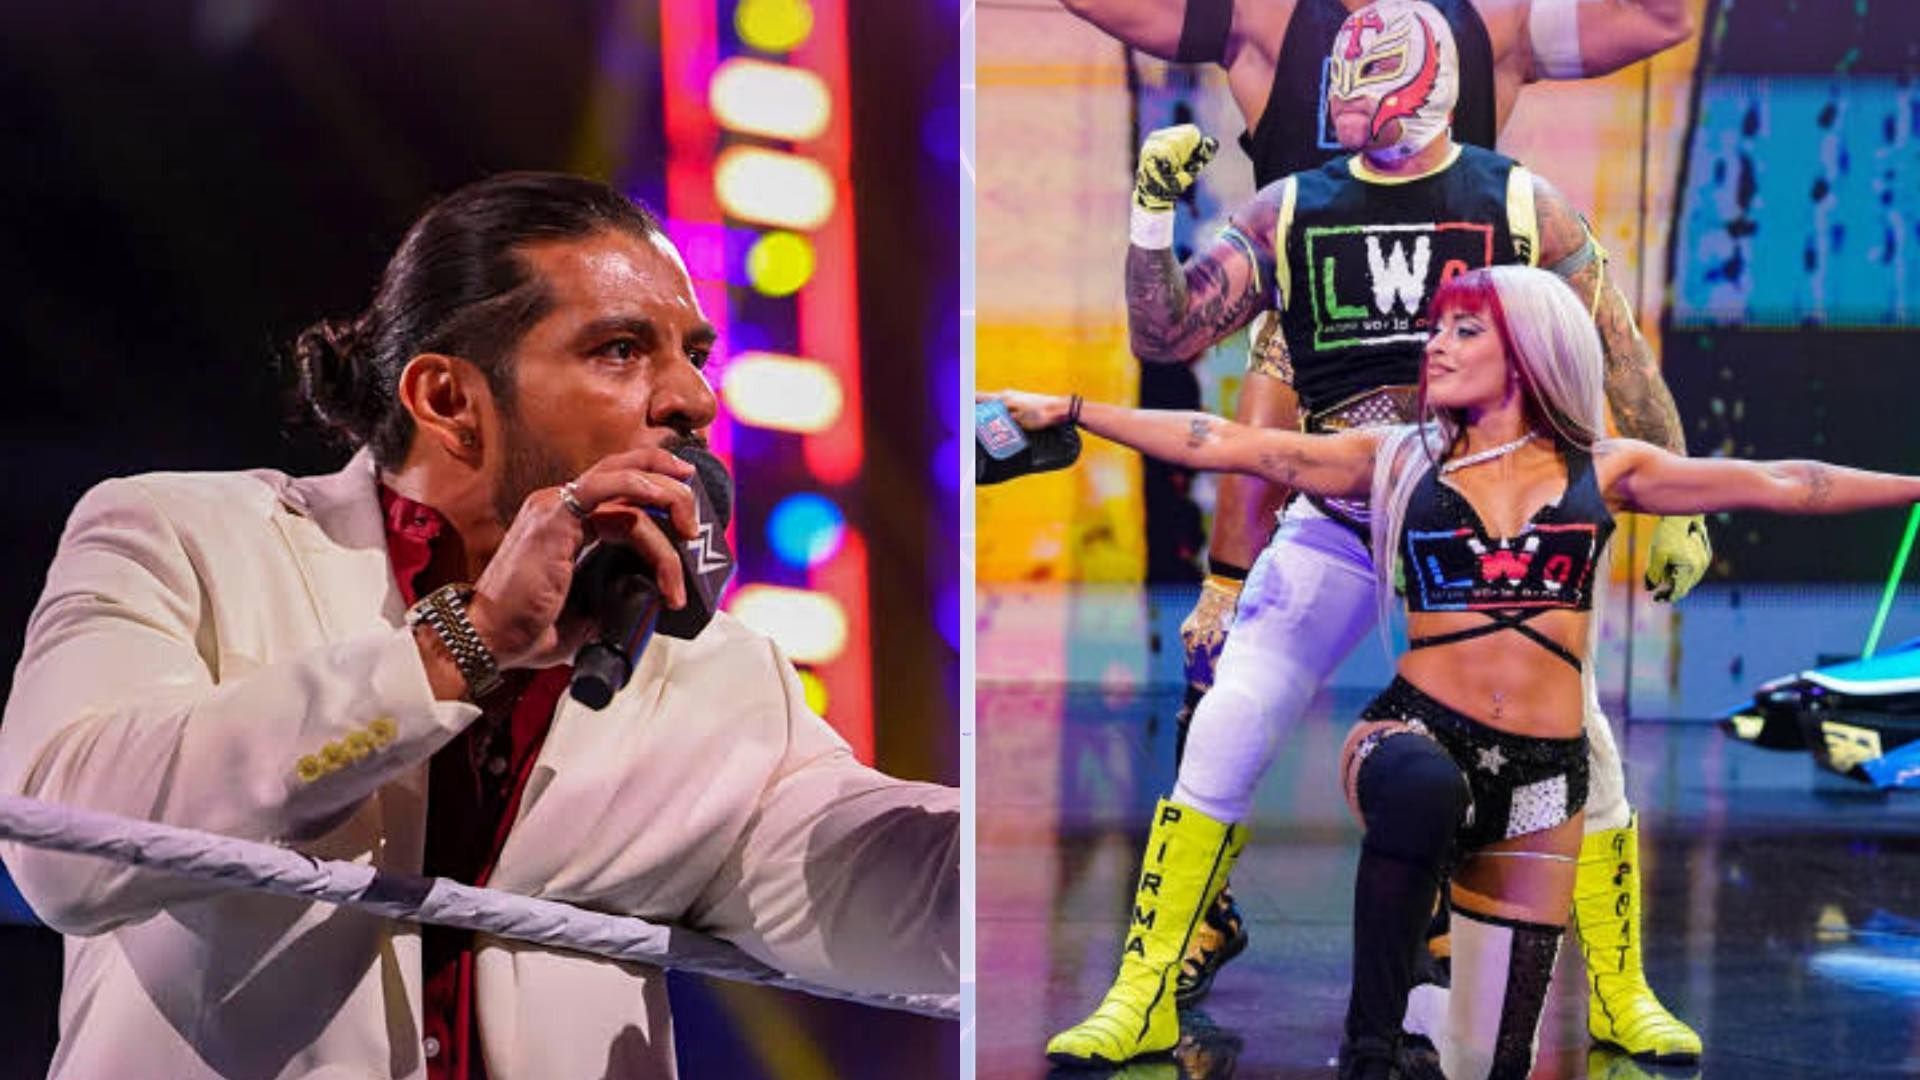 Santos Escobar could recruit a new WWE star to take down the Latino World Order